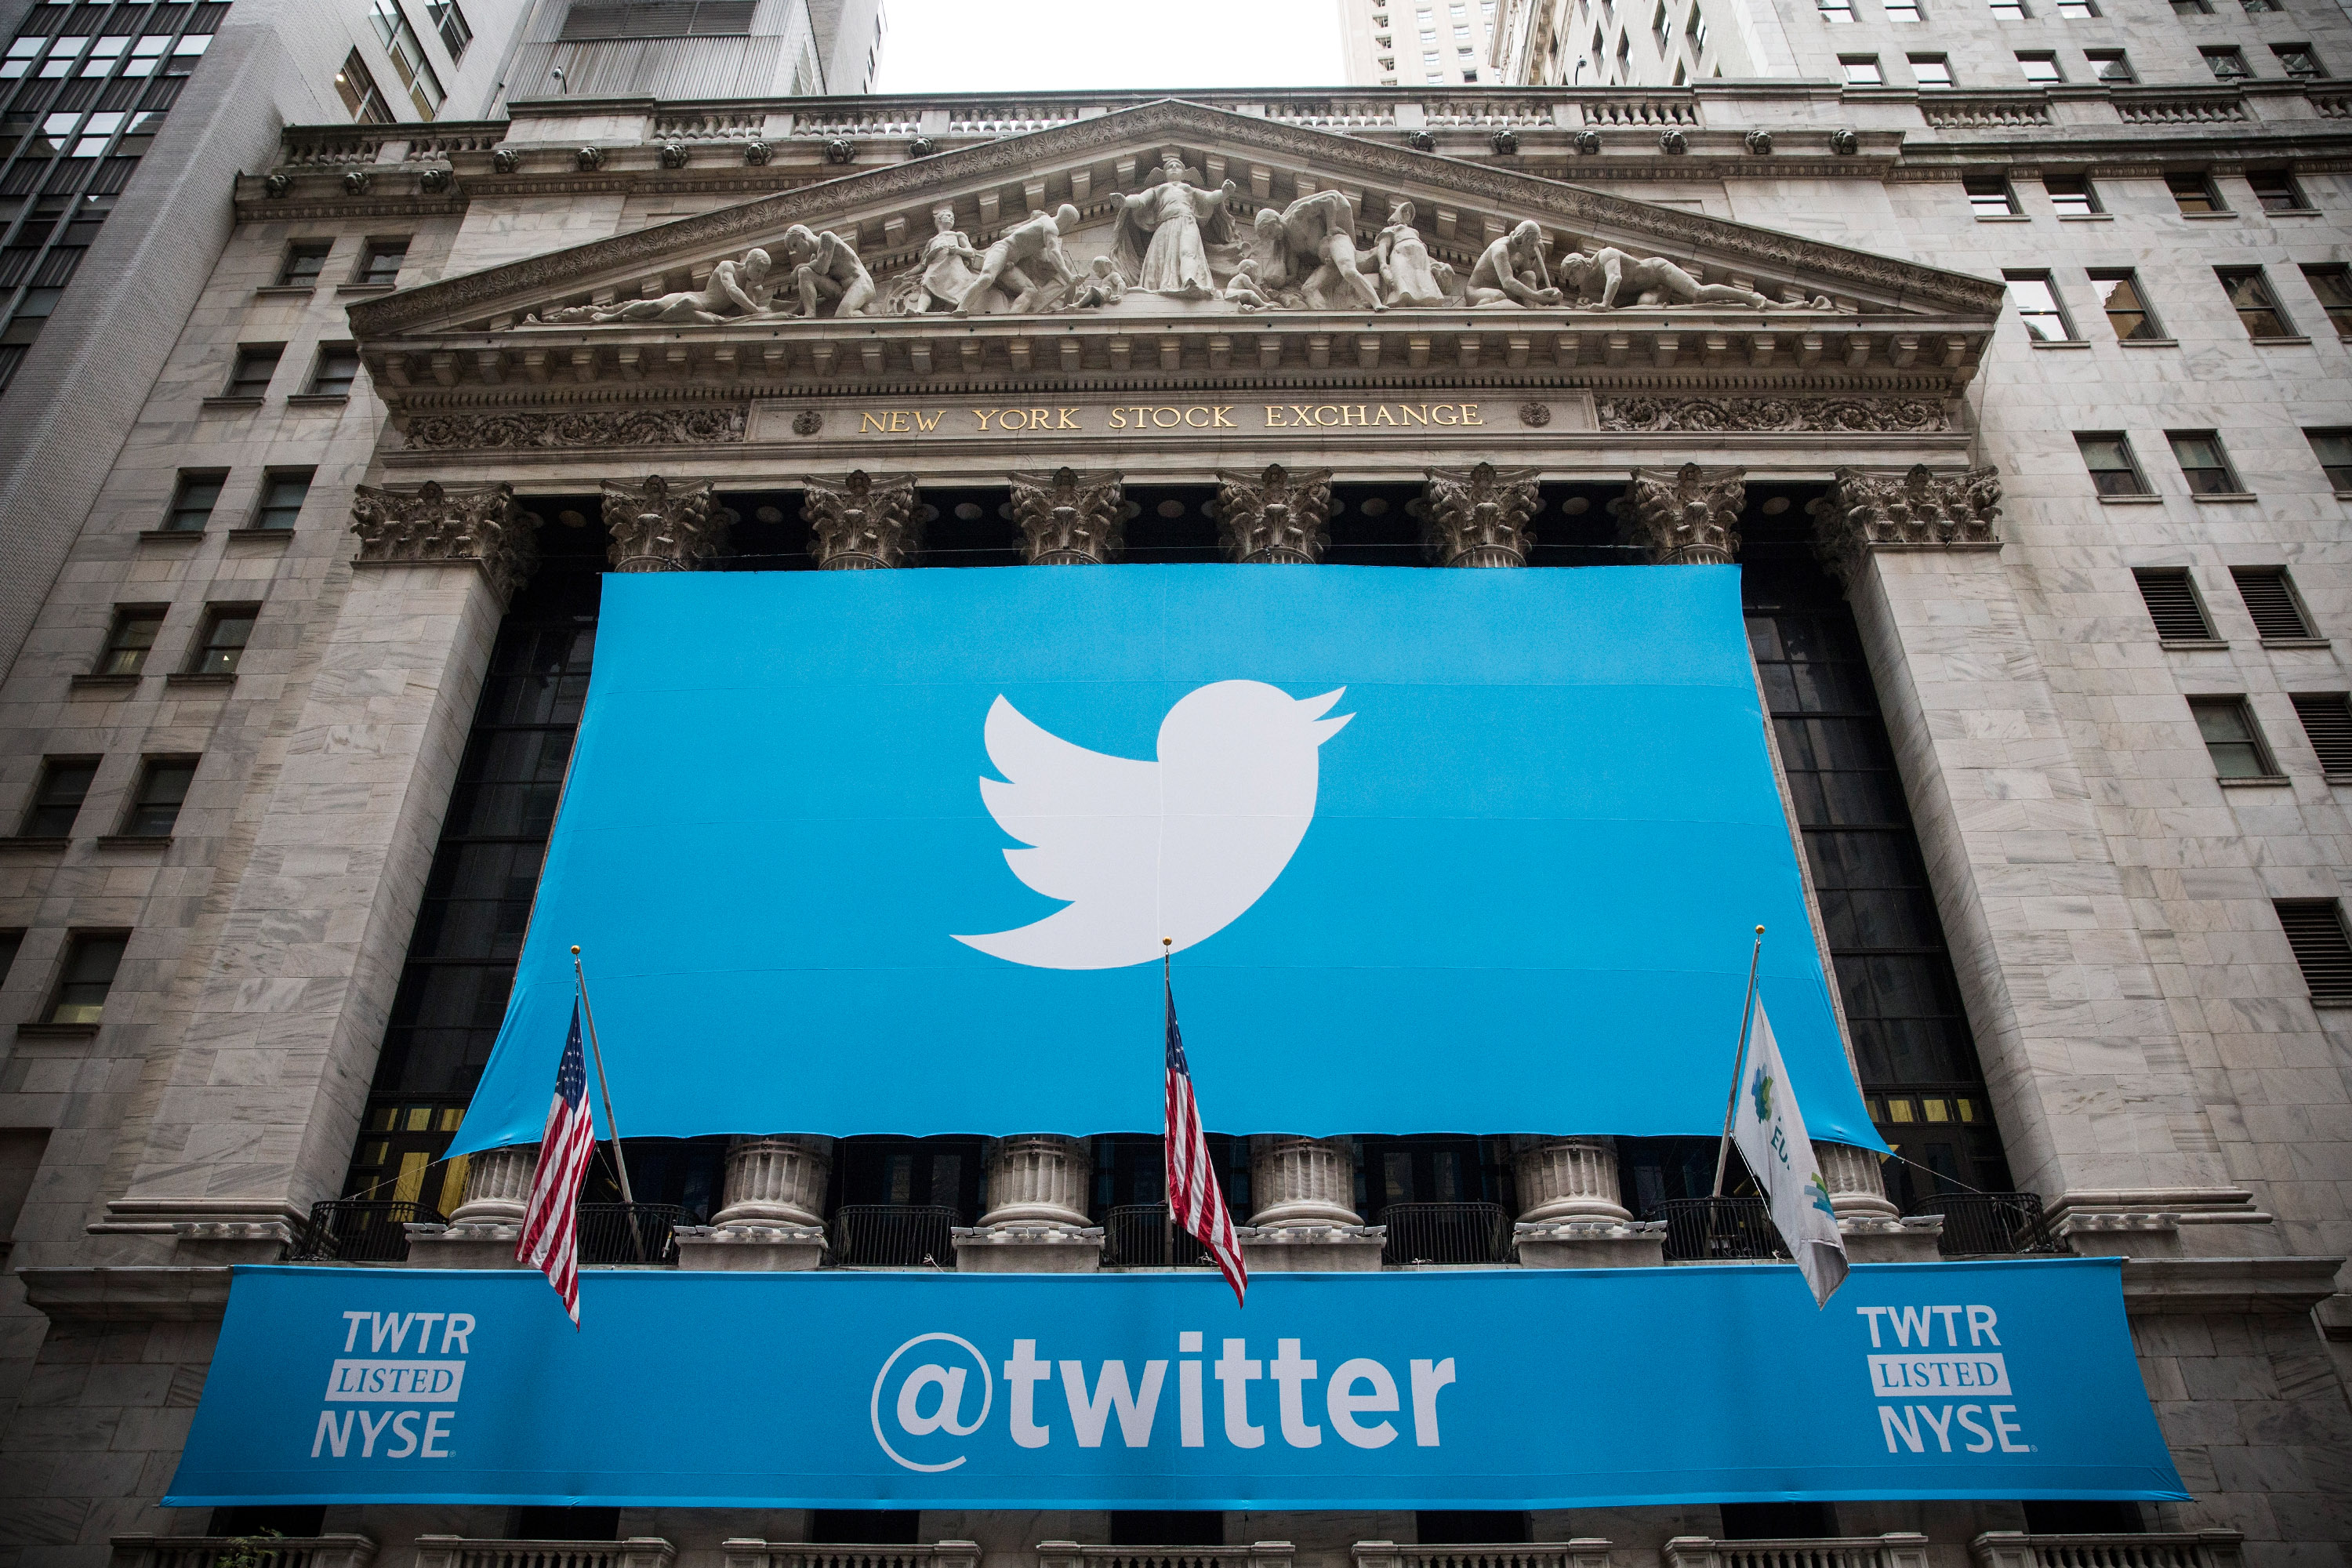 The Twitter logo is displayed on a banner outside the New York Stock Exchange (NYSE) on November 7, 2013 in New York City. (Andrew Burton—Getty Images)